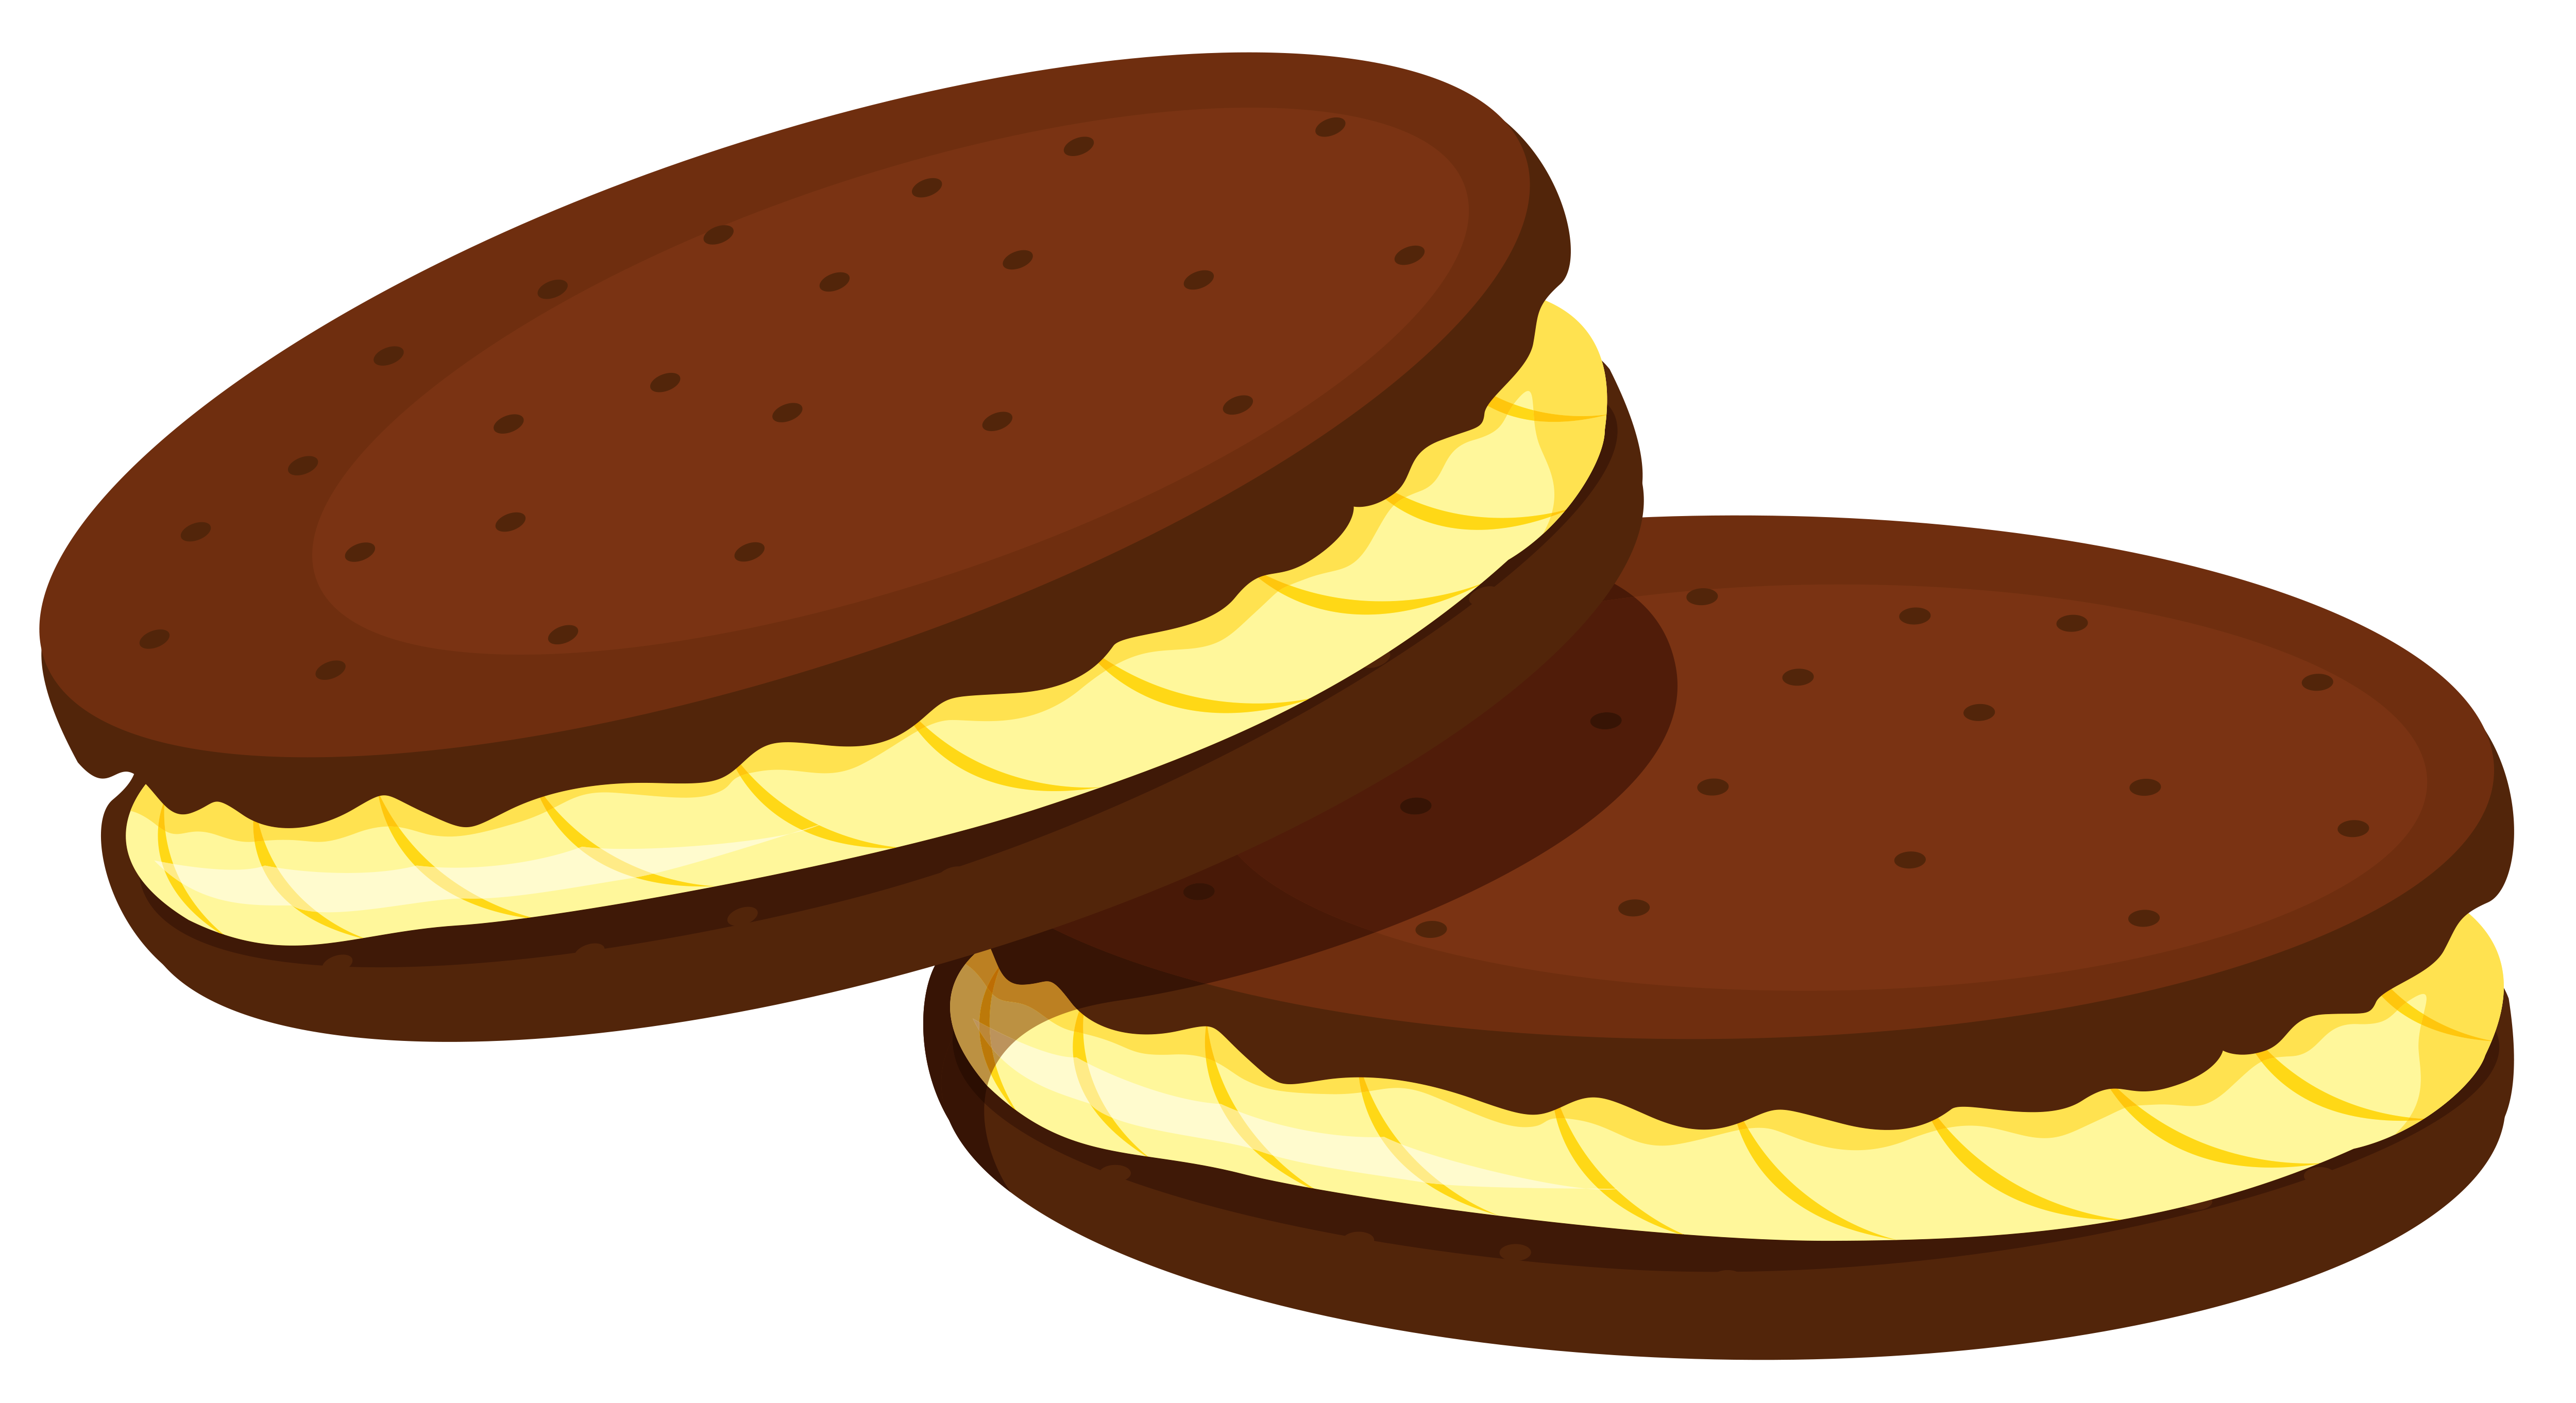 Chocolate cookies with filling. Sandwich clipart sandwich chip